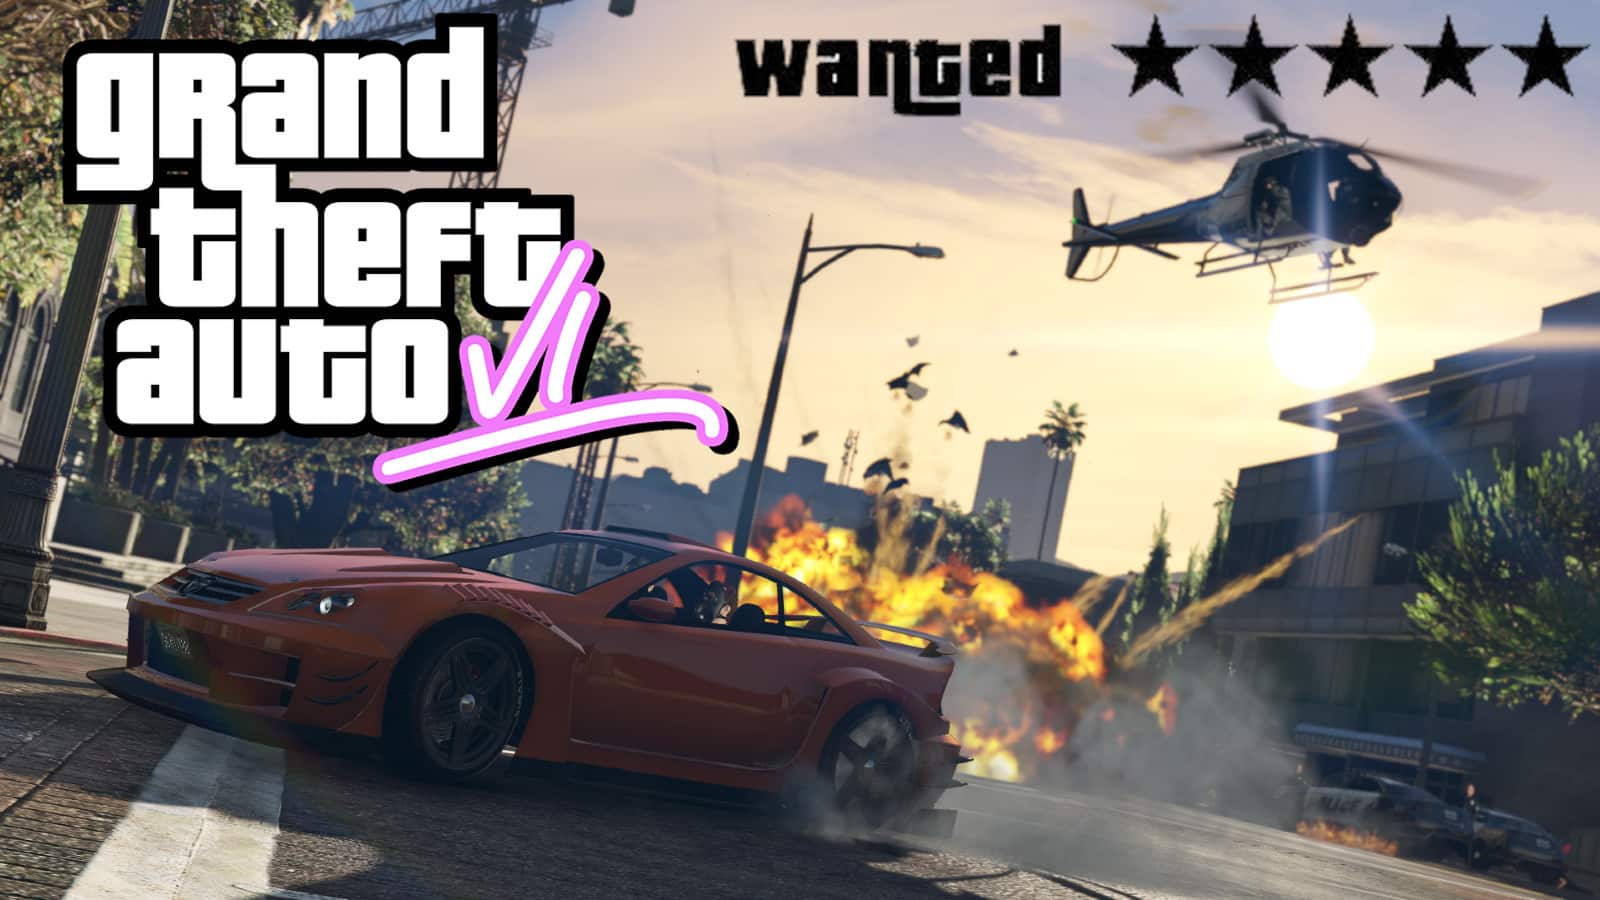 Major Changes to GTA 6 Wanted System Revealed in Gameplay Leaks